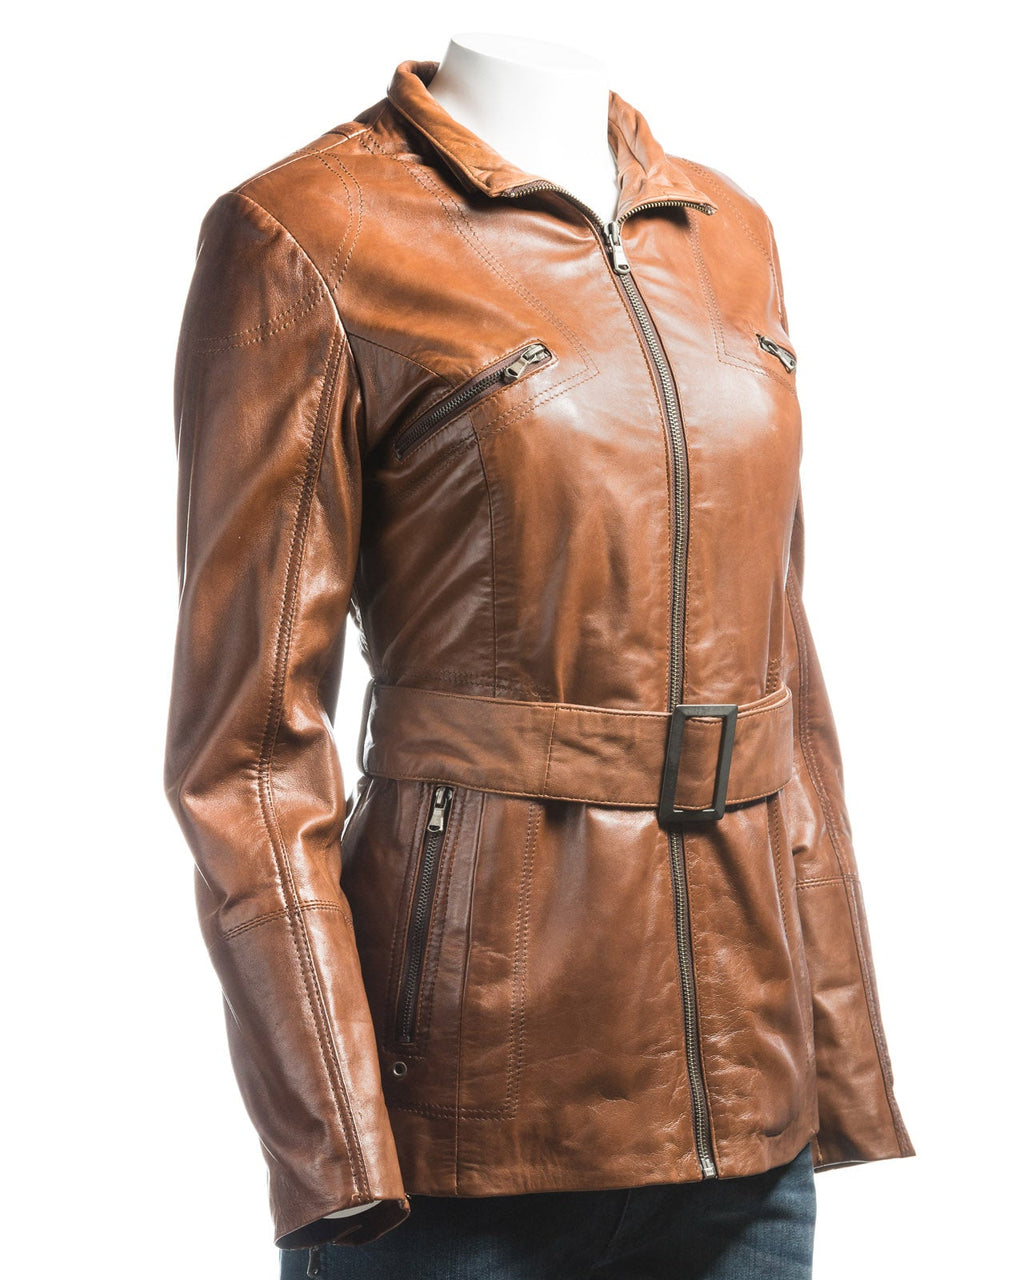 Ladies Cognac Belted Leather Coat With Detachable Fur Trimmed Hood: Paola